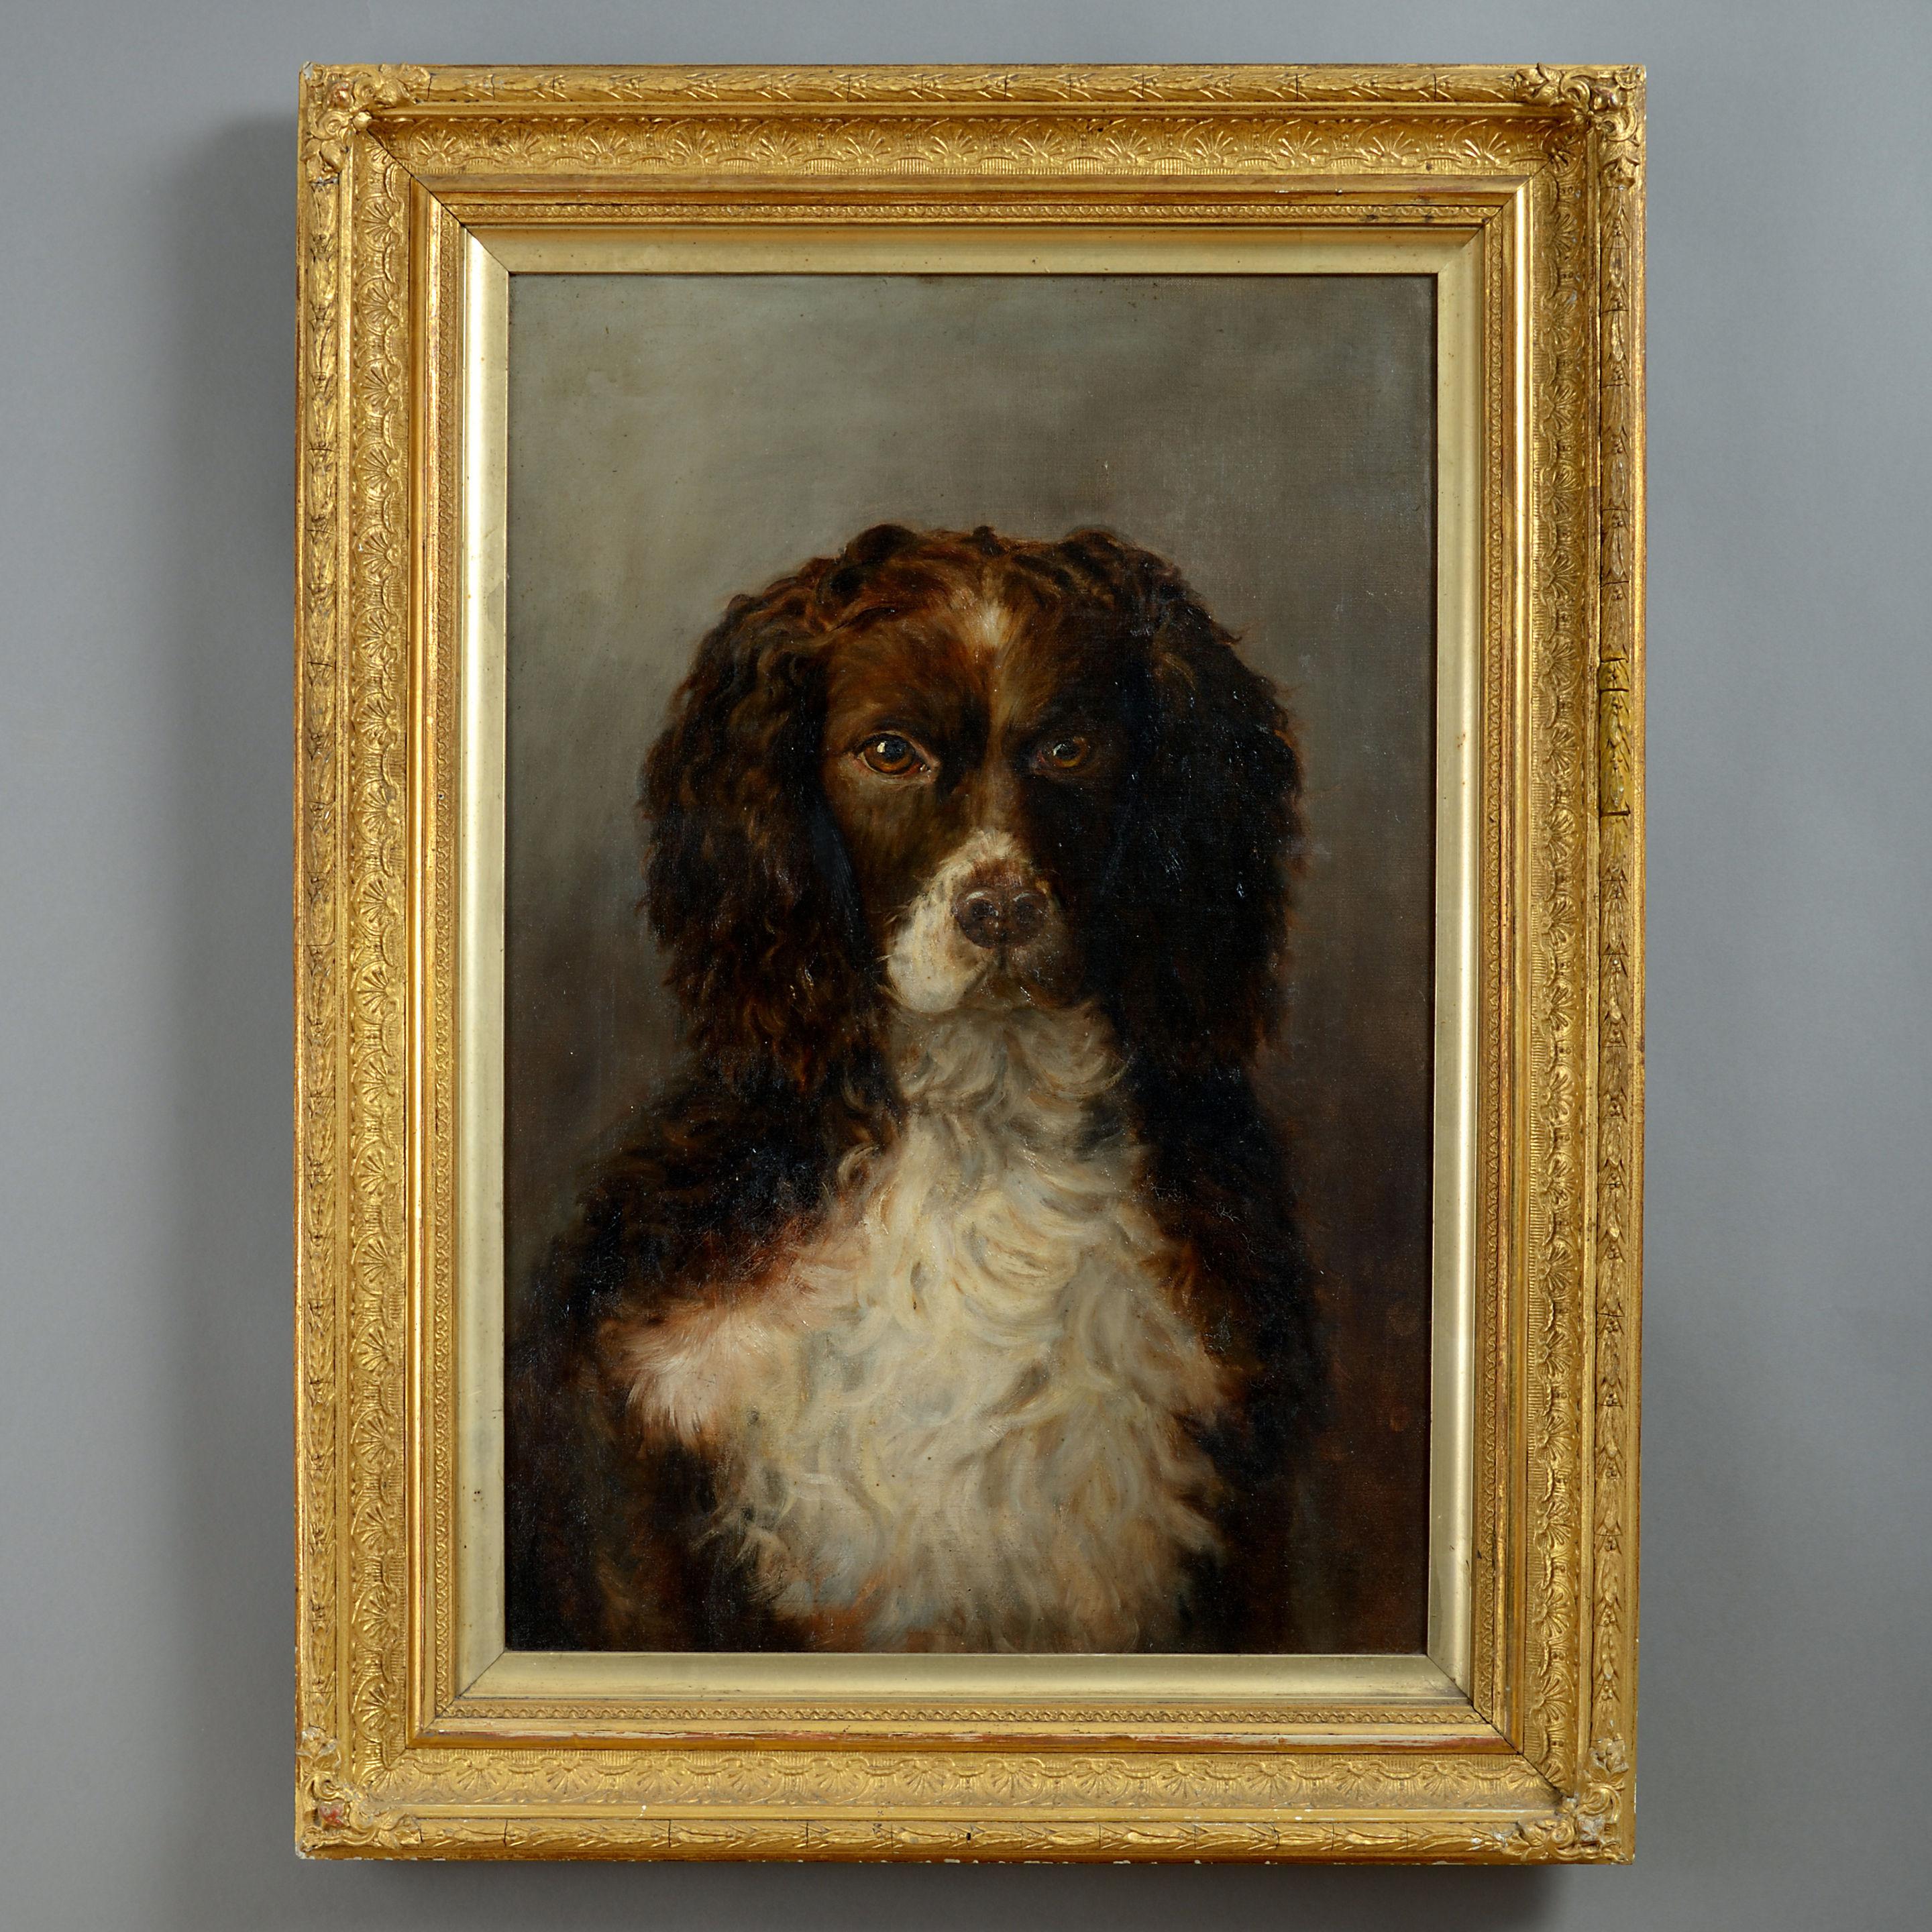 A charming early 20th century portrait of a cocker spaniel. Held in a rectangular gilt composition frame. 

Inscribed verso: 'Dash' 1903